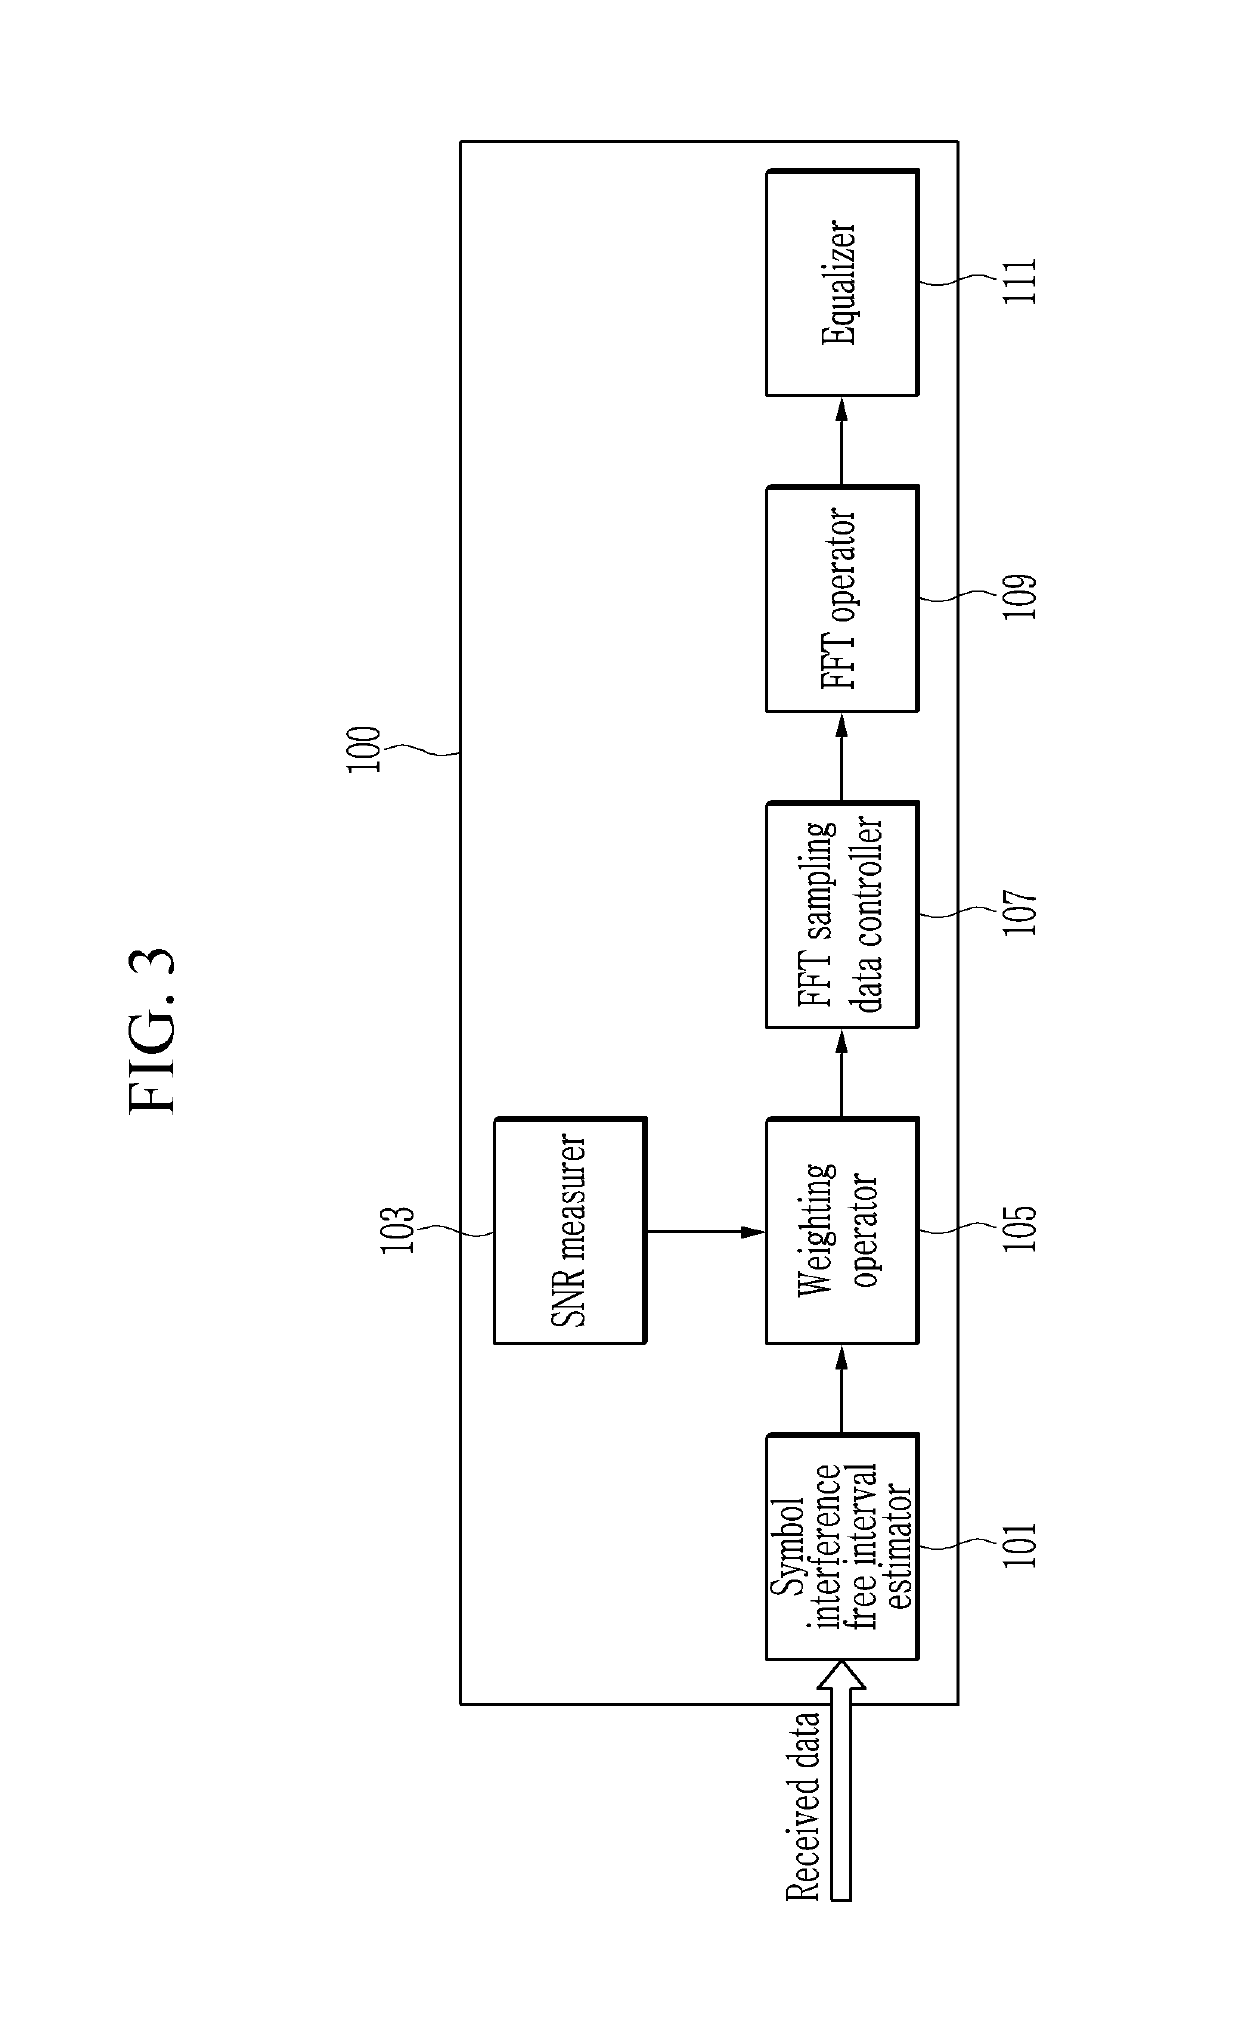 Method for suppressing inter-subcarrier interference and noise signal, and orthogonal frequency division multiplexing receiver for performing same